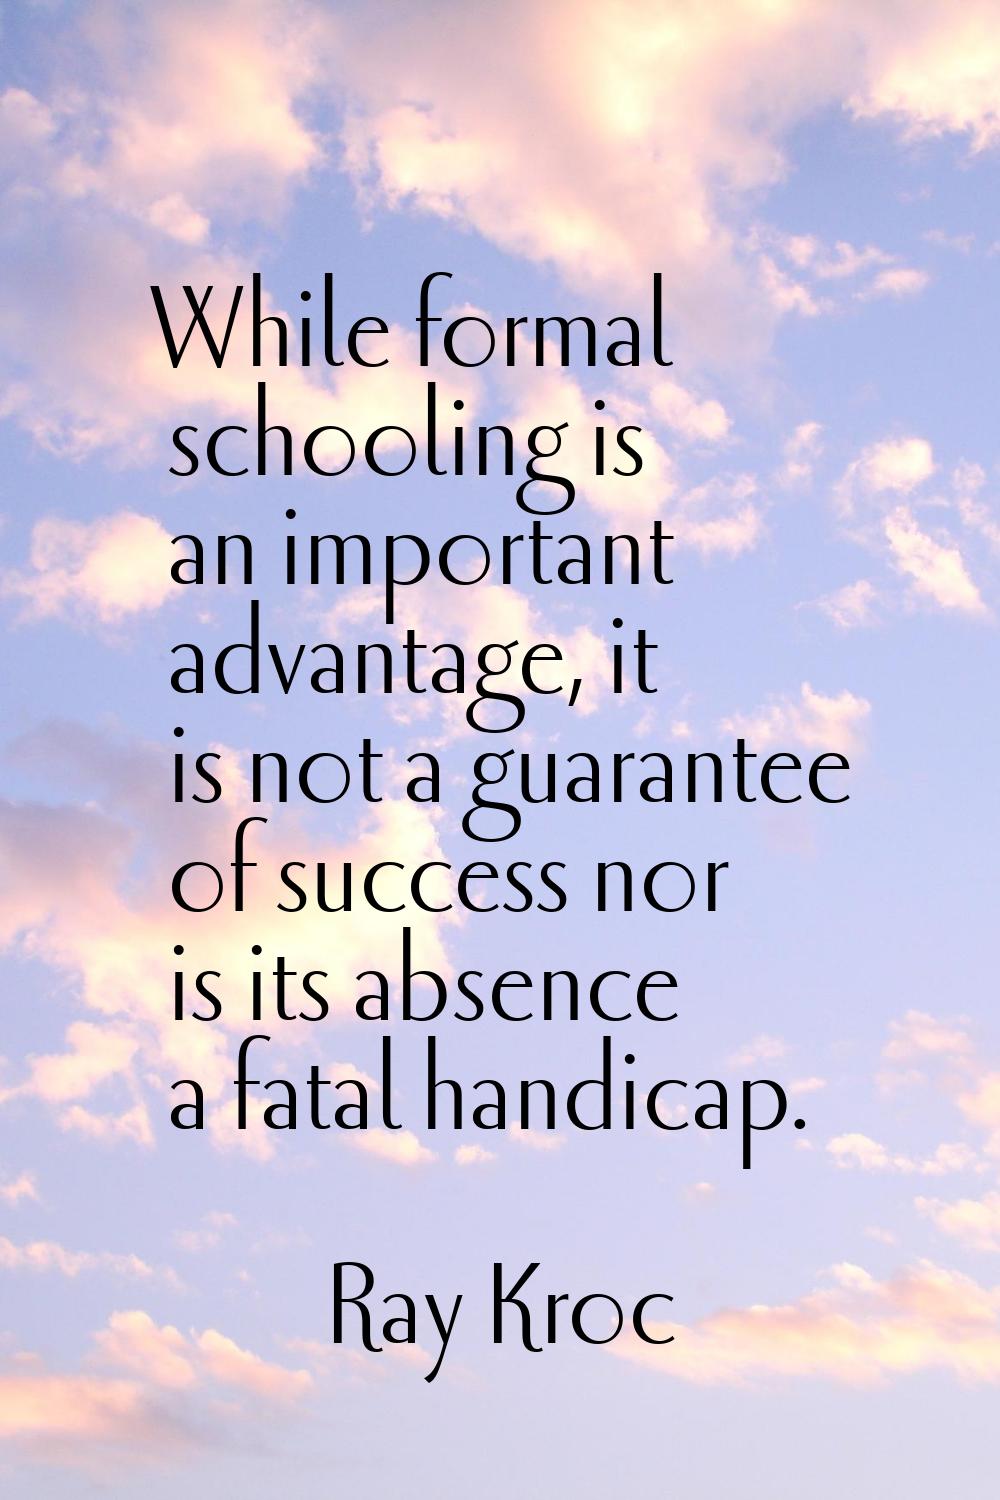 While formal schooling is an important advantage, it is not a guarantee of success nor is its absen